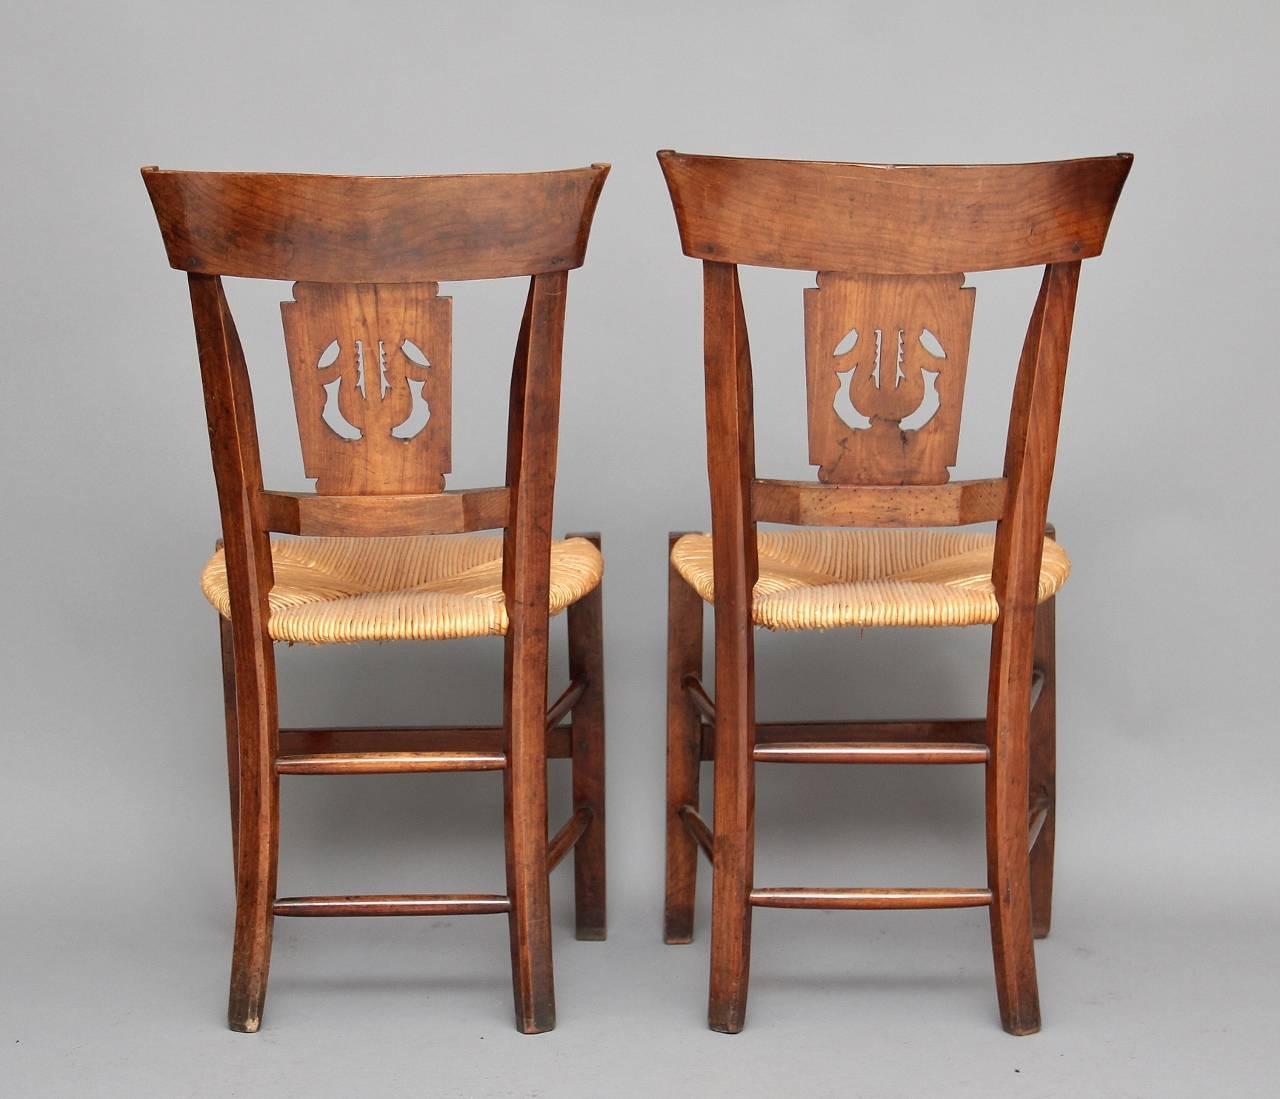 Mid-19th Century Pair of 19th Century Fruitwood Chairs